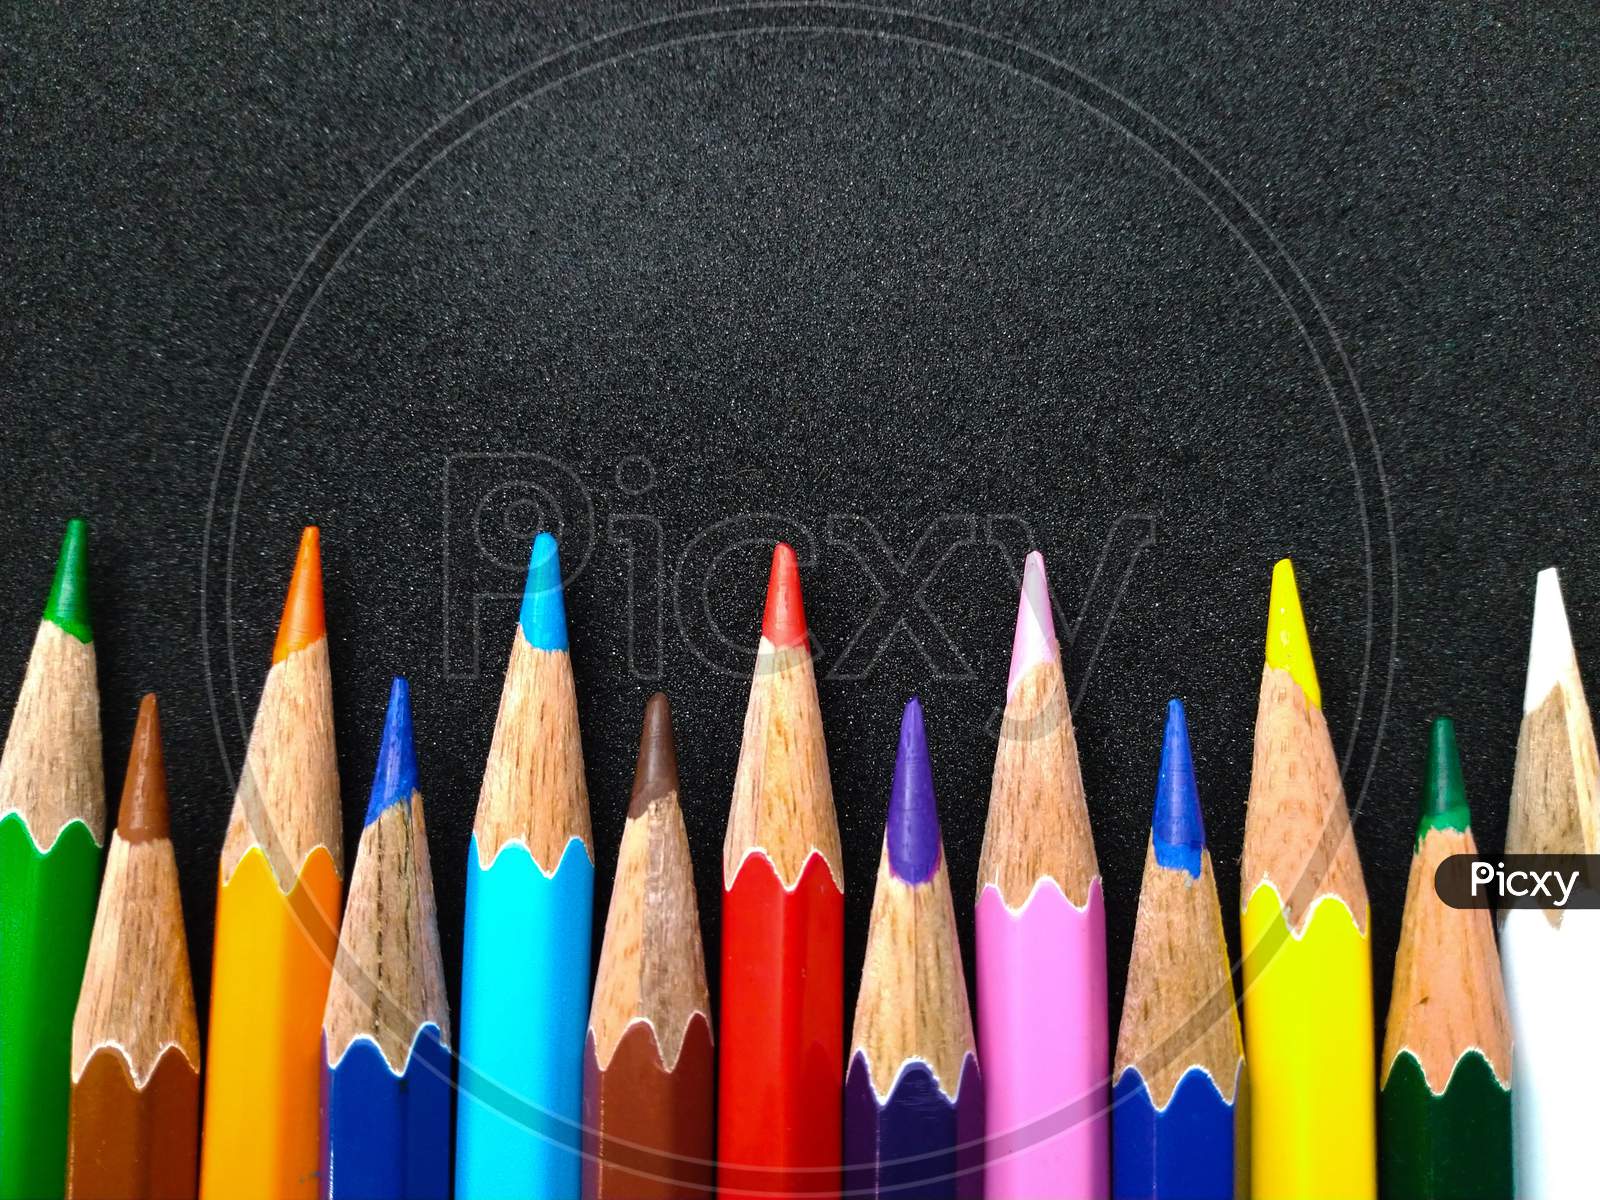 Colour Pencil For Drawing And Educational Use.
Colour Pencil For Drawing And Educational Use.